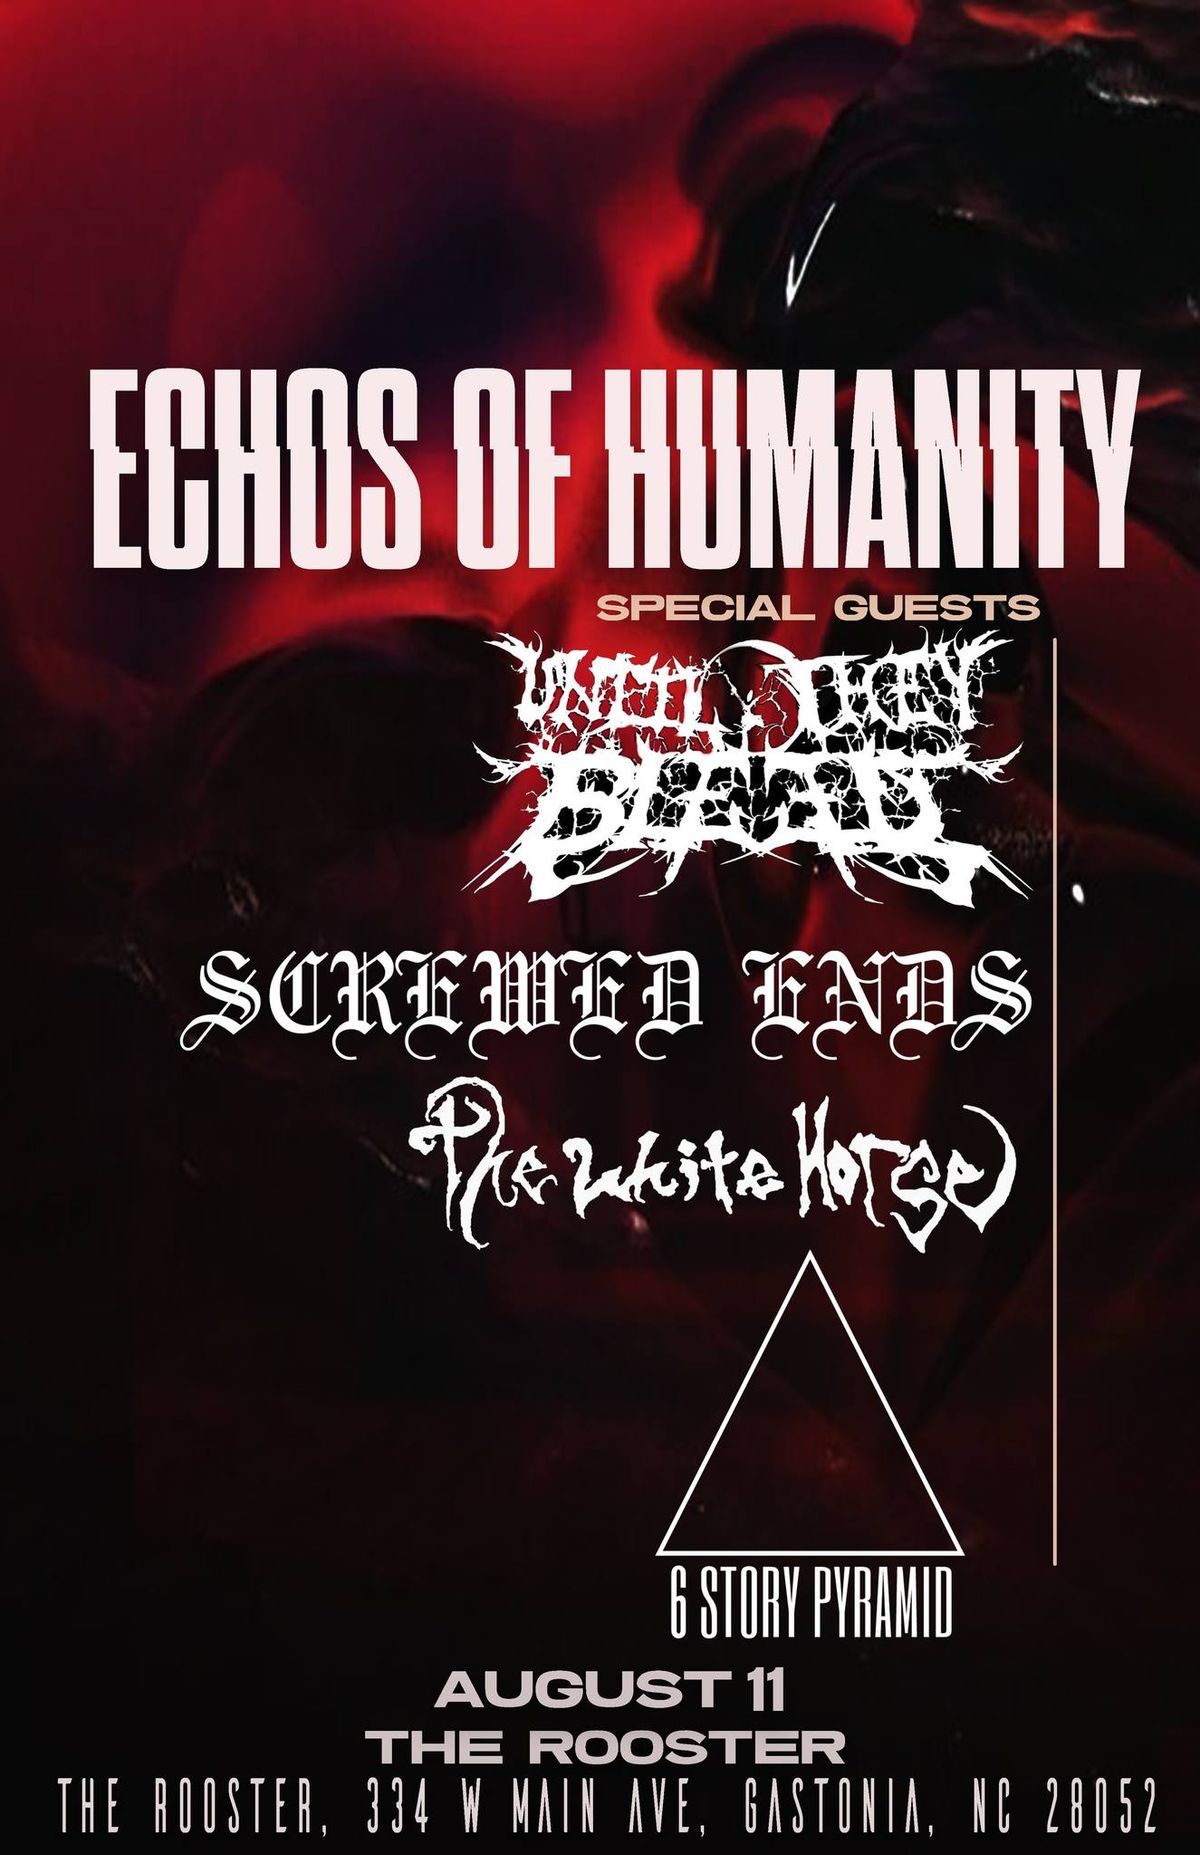 Echos of Humanity w\/Until They Bleed, Screwed Ends, The White Horse & 6 Story Pyramid